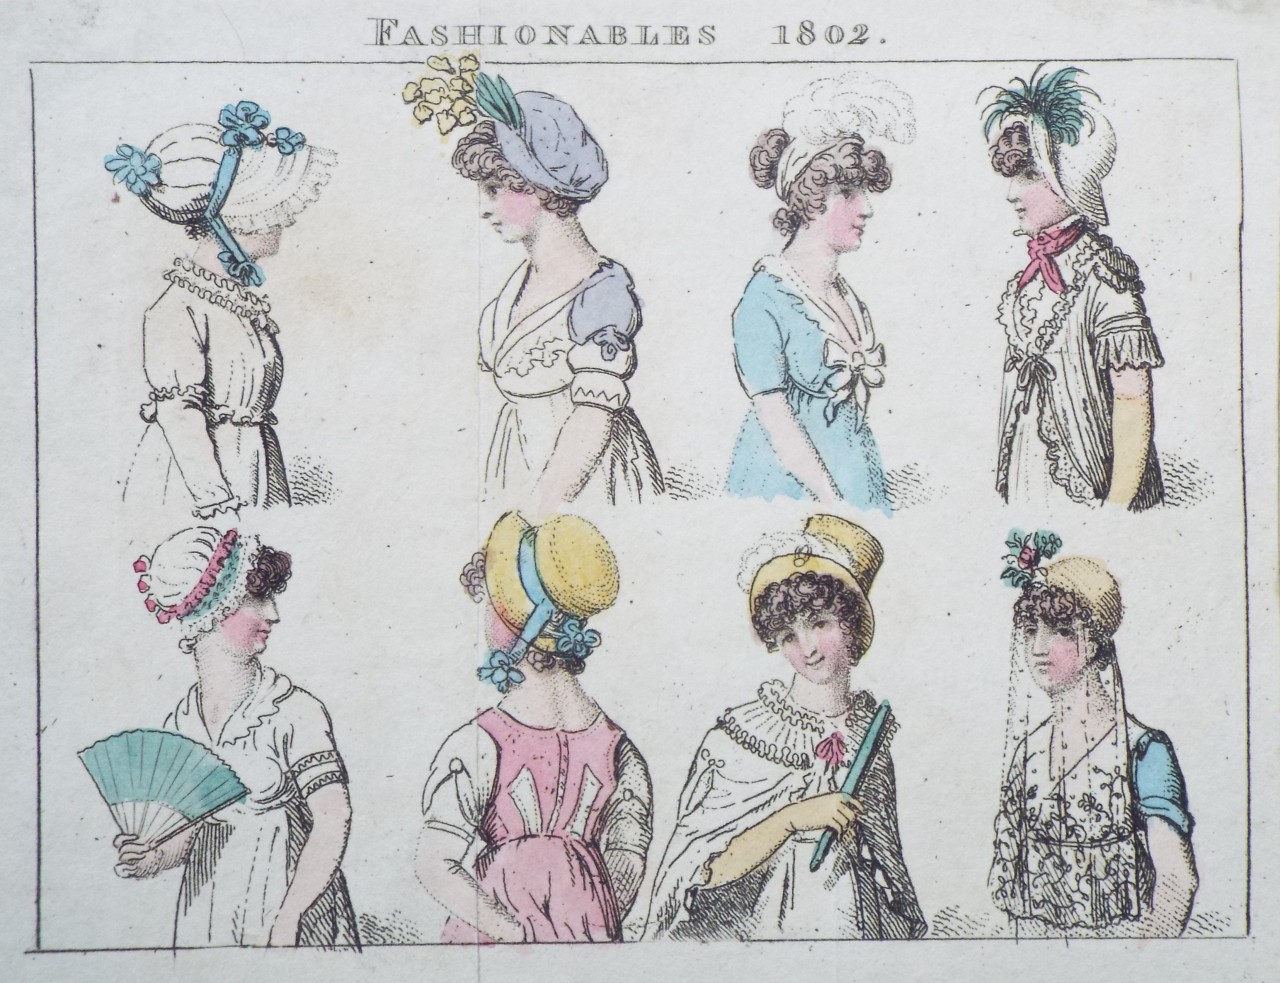 Etching - Fashionables 1802.